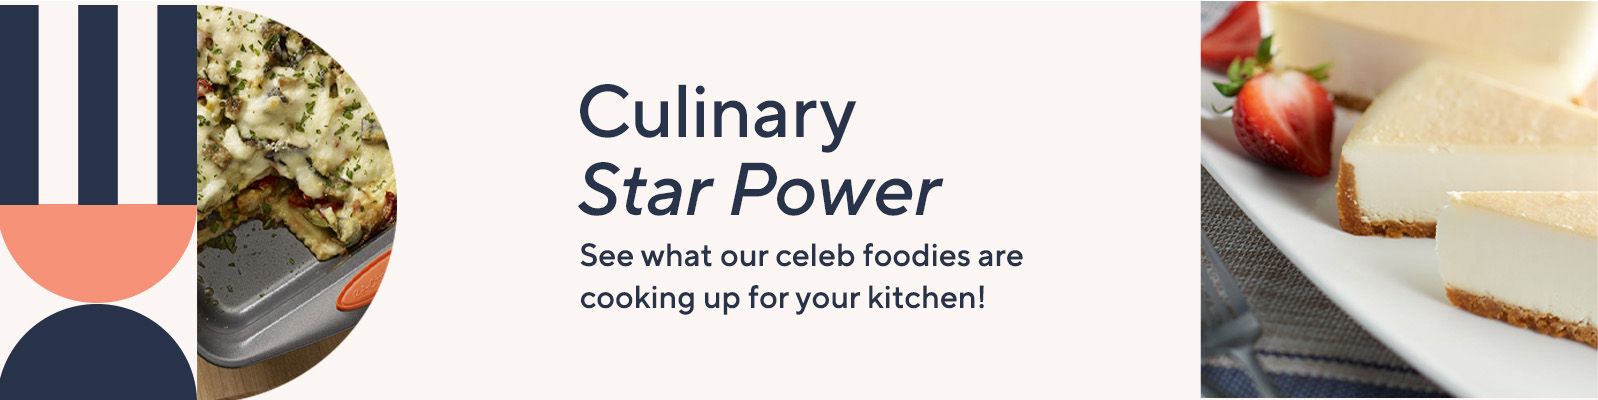 Culinary Star Power  See what our celeb foodies are cooking up for your kitchen!